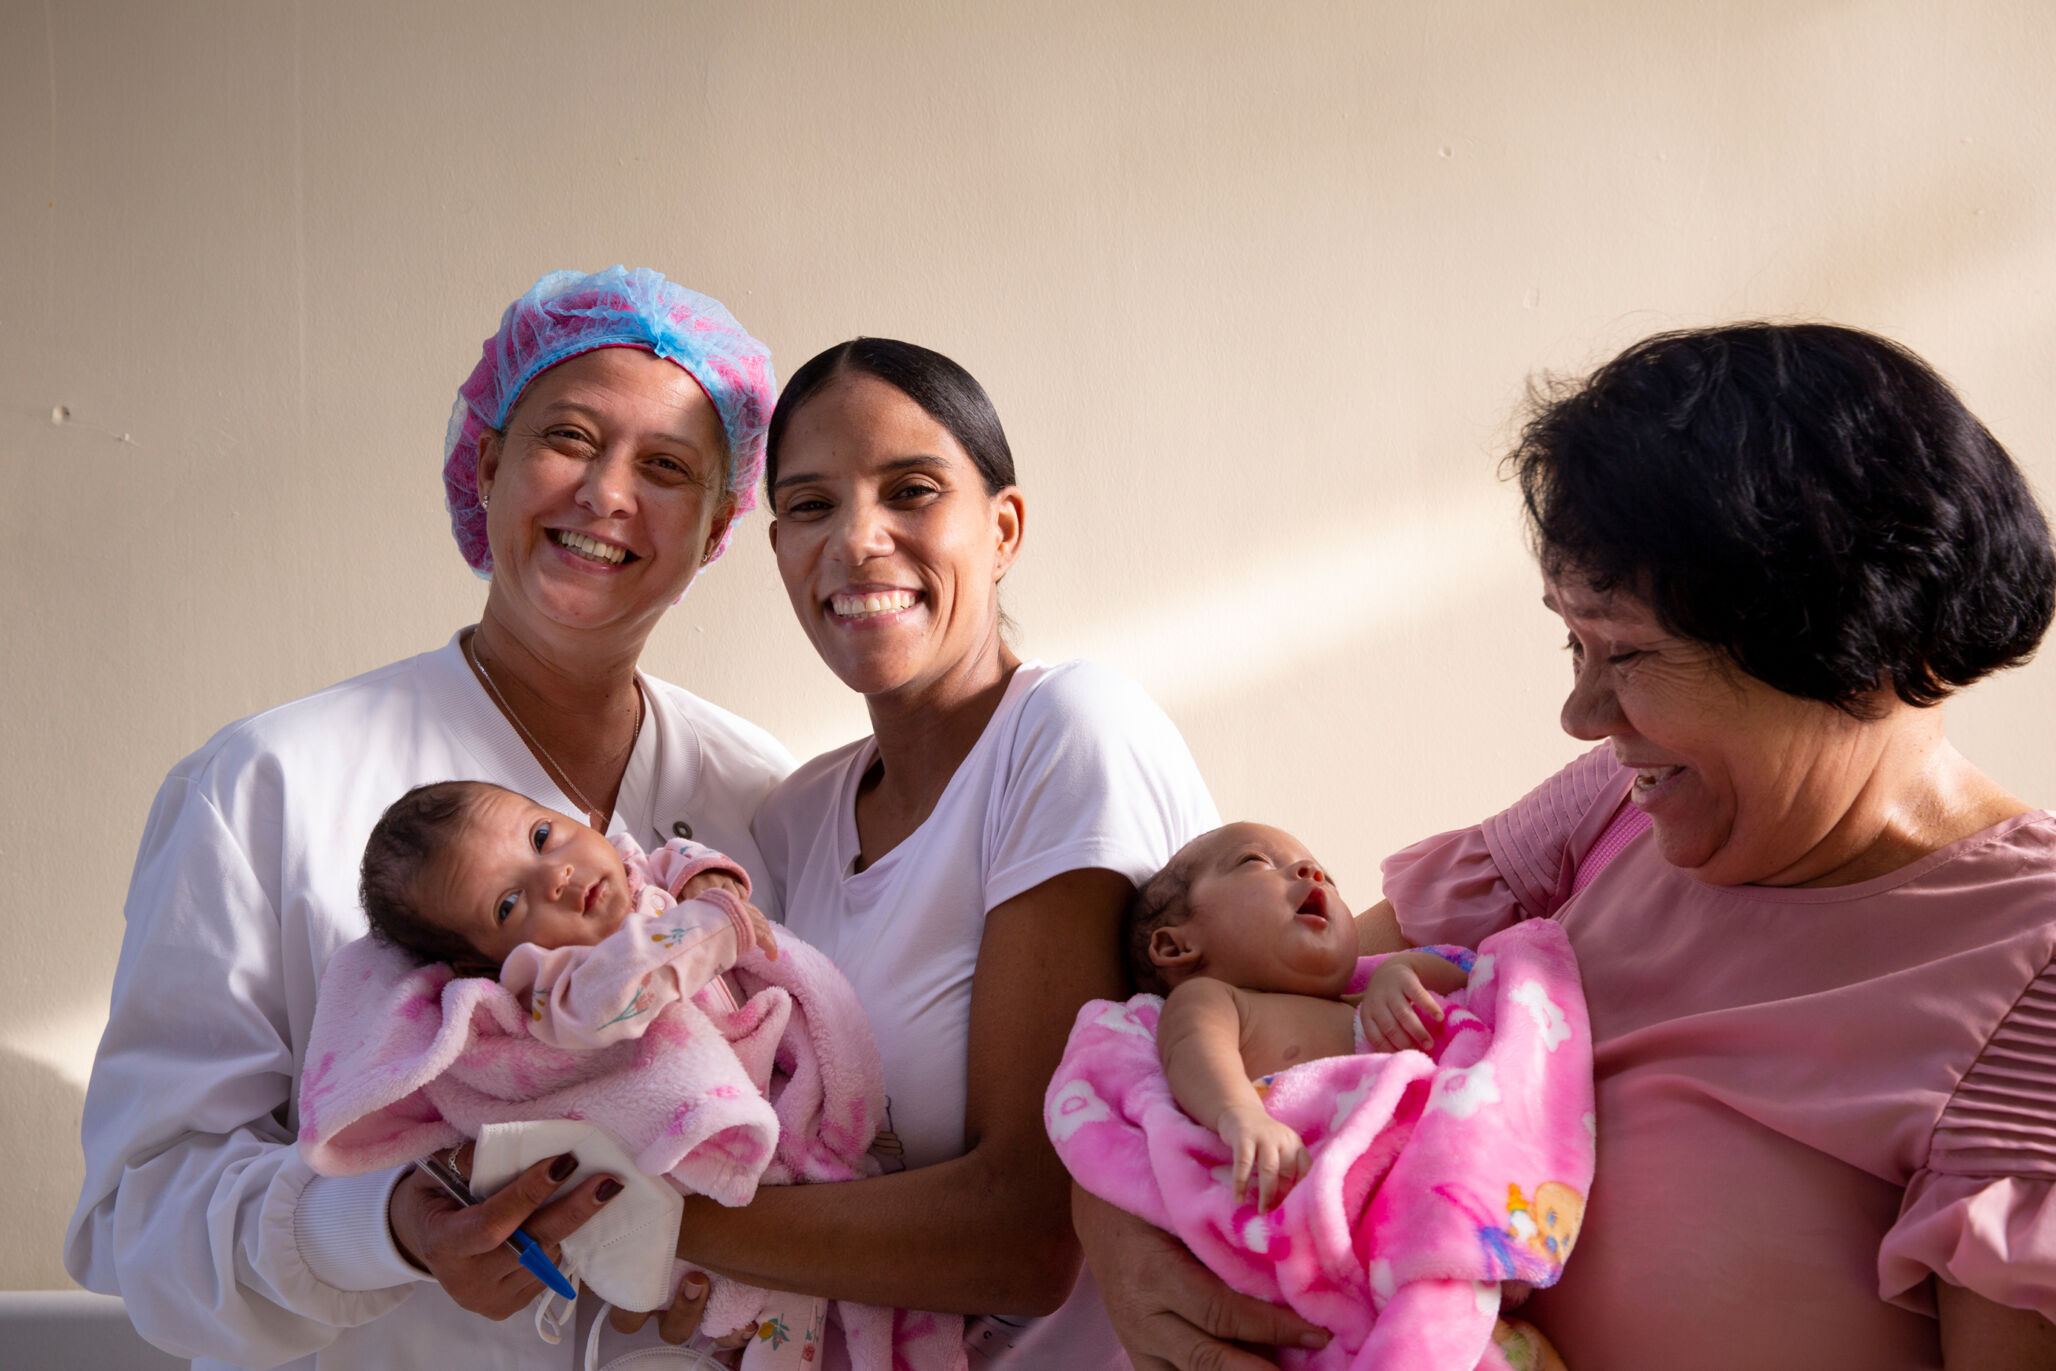 A new mother smiles while holding her baby, along with medical staff. Another woman holds a newborn and smiles.